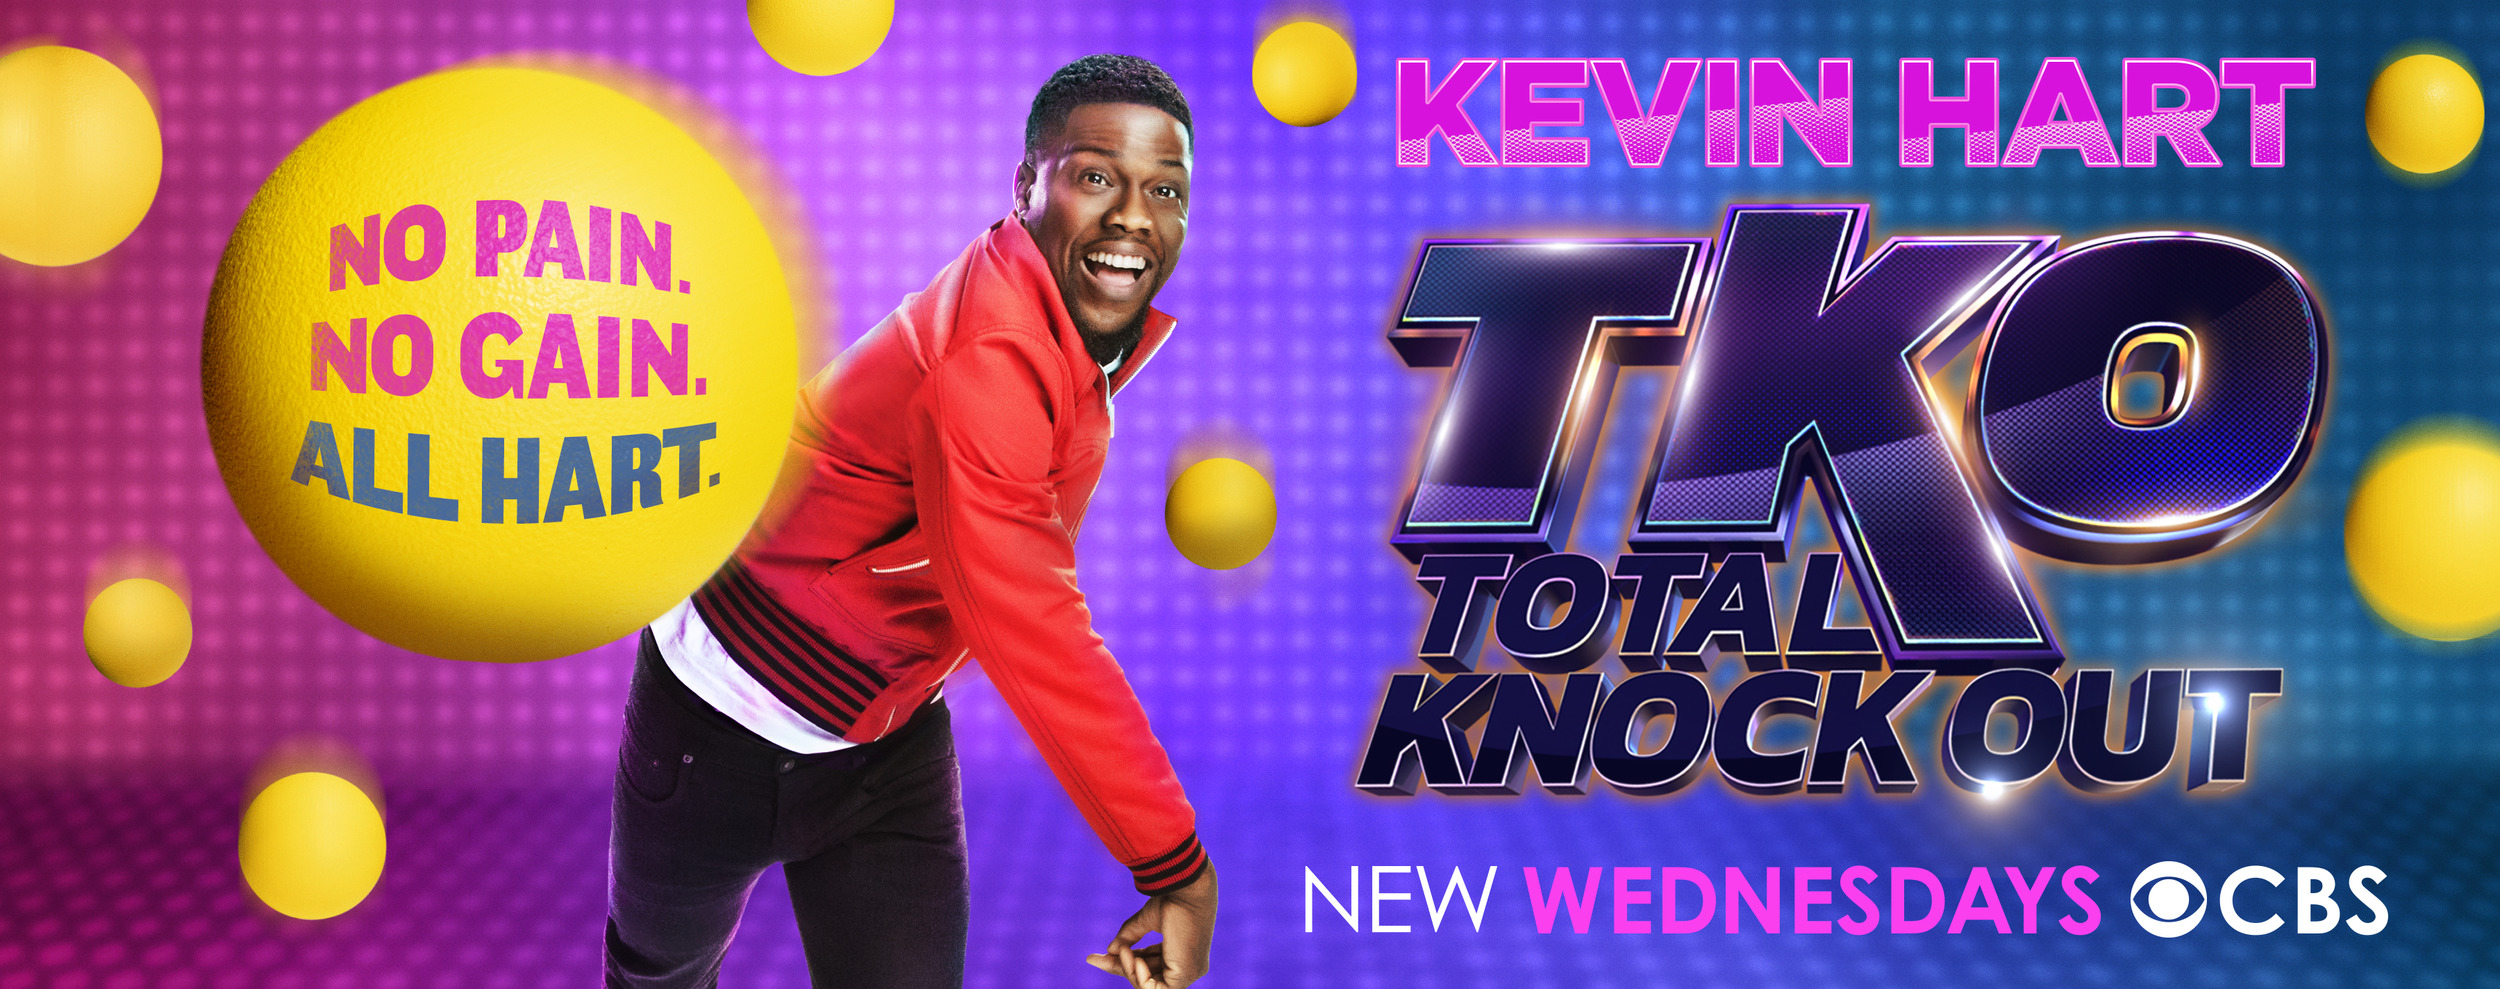 Mega Sized TV Poster Image for TKO: Total Knock Out 